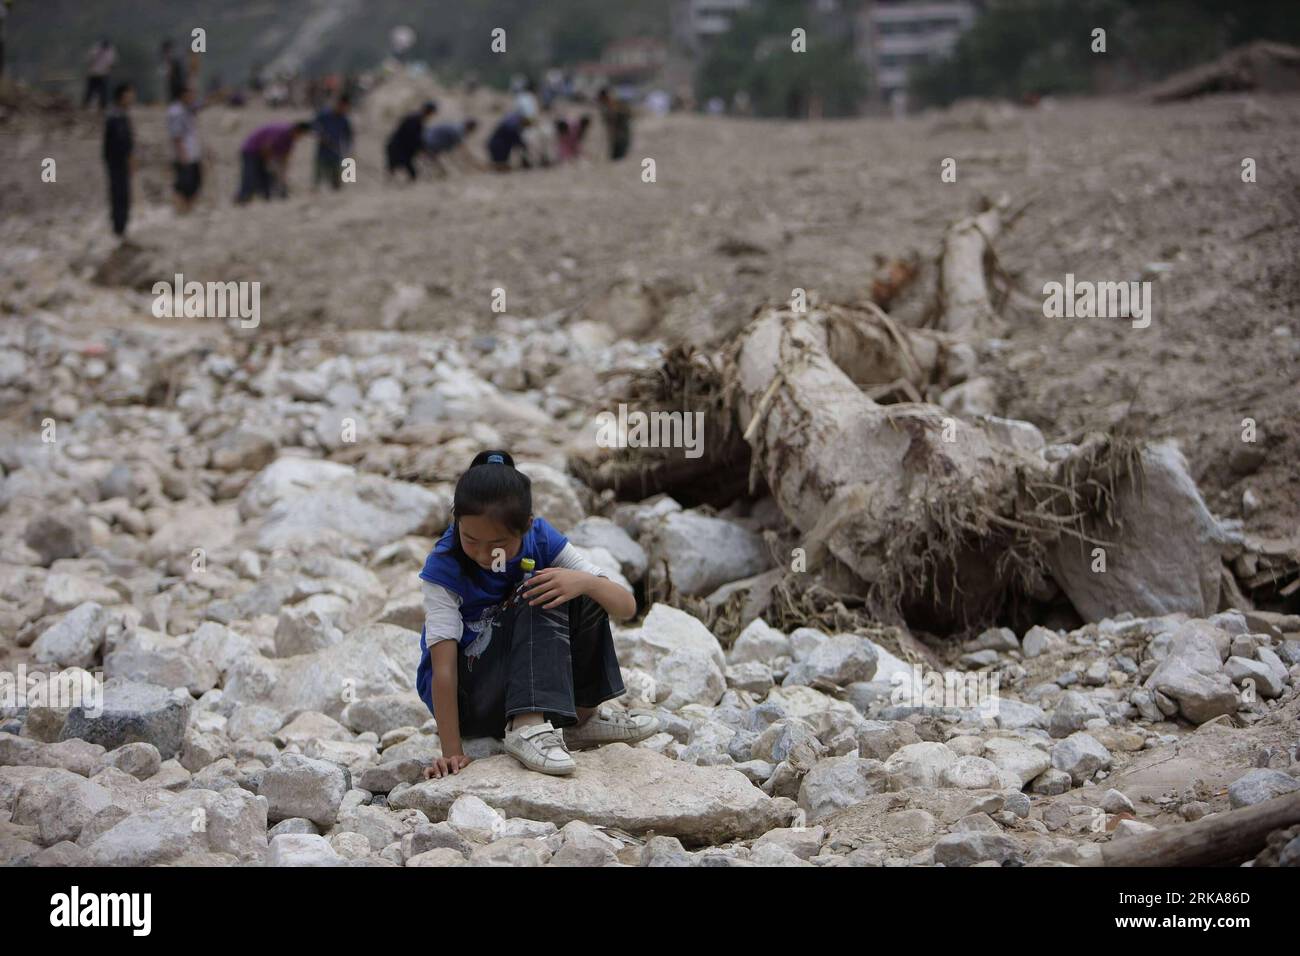 Bildnummer: 54284963  Datum: 09.08.2010  Copyright: imago/Xinhua ZHOUQU, Aug. 9, 2010 (Xinhua) -- Photo taken on Aug. 9, 2010 shows a girl waiting her parents who are busy doing rescue work in landslide-hit Zhouqu County, Gannan Tibetan Autonomous Prefecture in northwest China s Gansu Province. The death toll from rain-triggered mudslides in Zhouqu County has risen to 137 as of 4:07 p.m. Monday, with 1,348 others still missing, said the provincial civil affairs department. Rescuers are racing against time in the search for survivors in the mudslide-flattened Zhouqu. (Xinhua/Xing Guangli) (cxy) Stock Photo